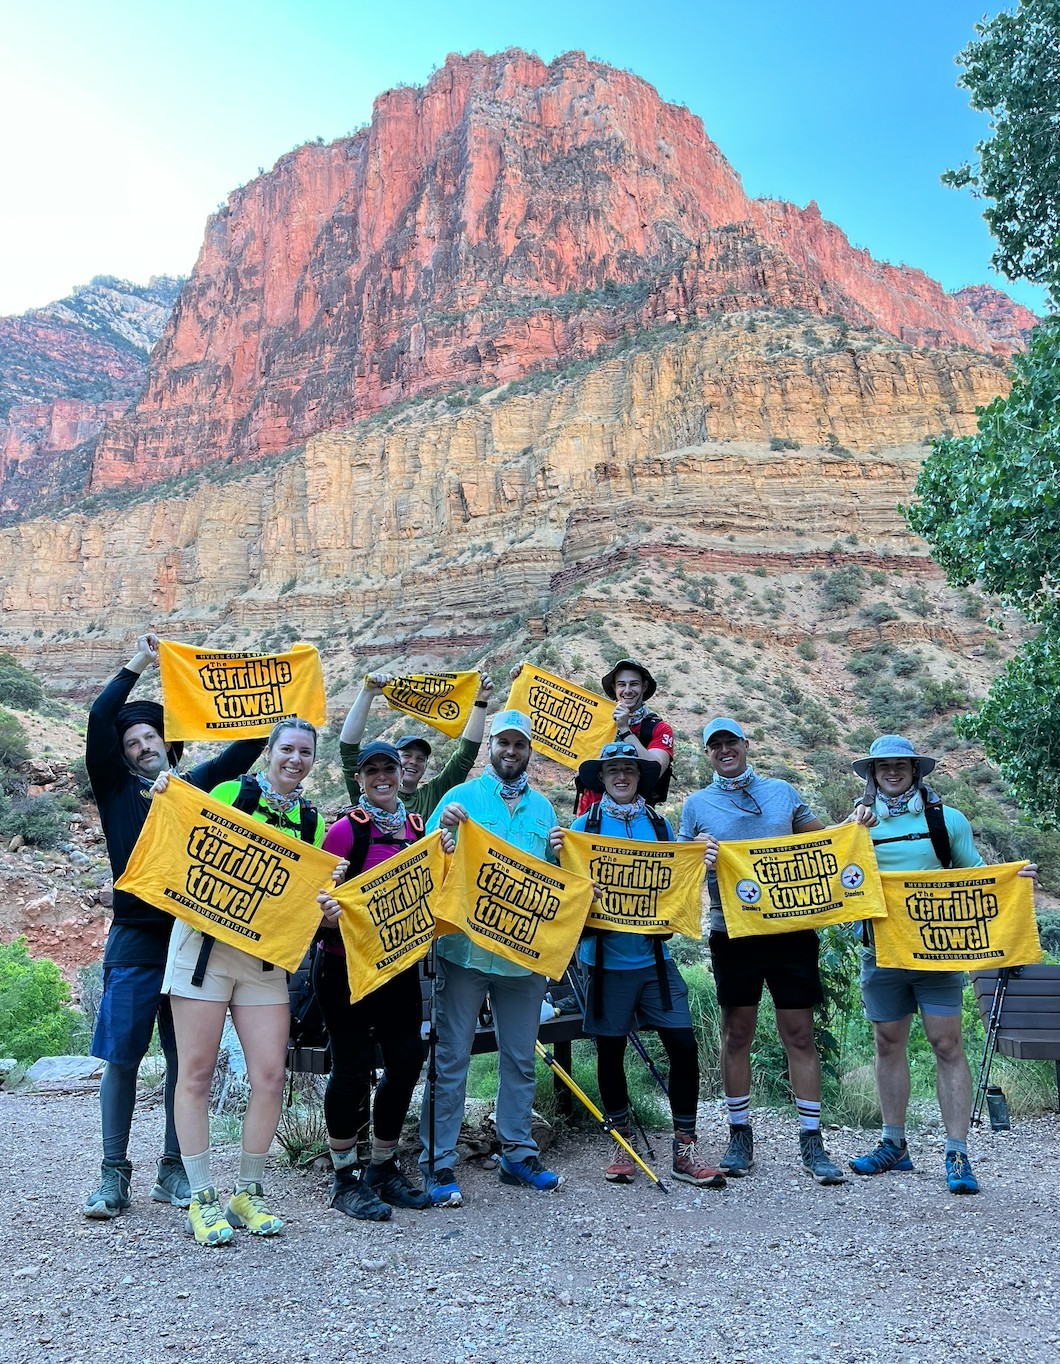 TPG partnered with Aurelius to complete a 25mi hike through the Grand Canyon and raised $15K for this great organization